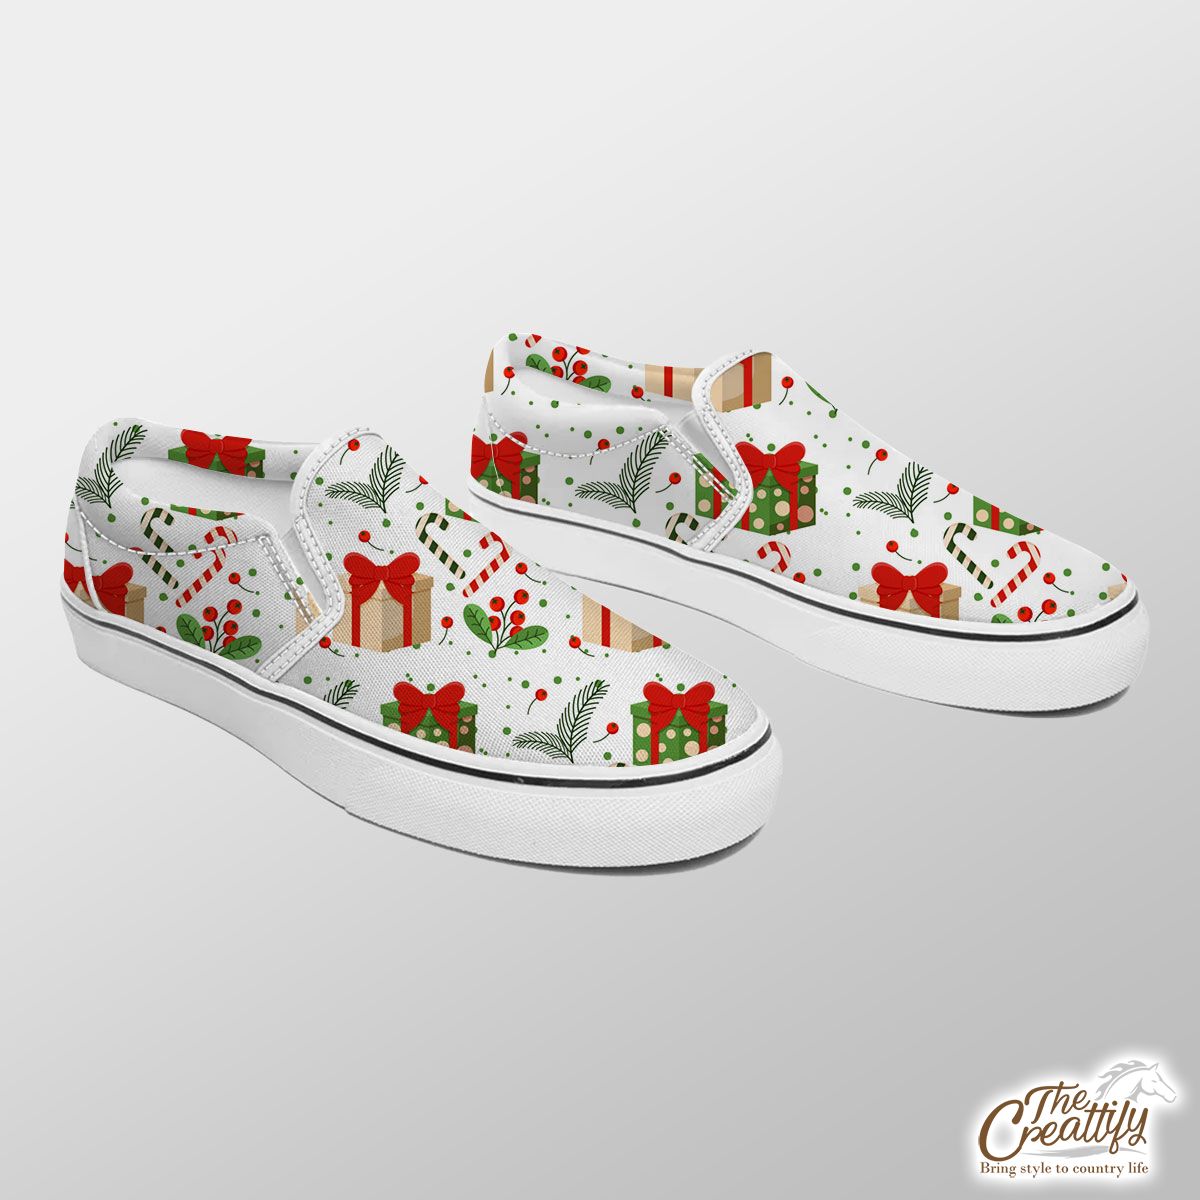 Christmas Gifts And Red Berries Slip On Sneakers